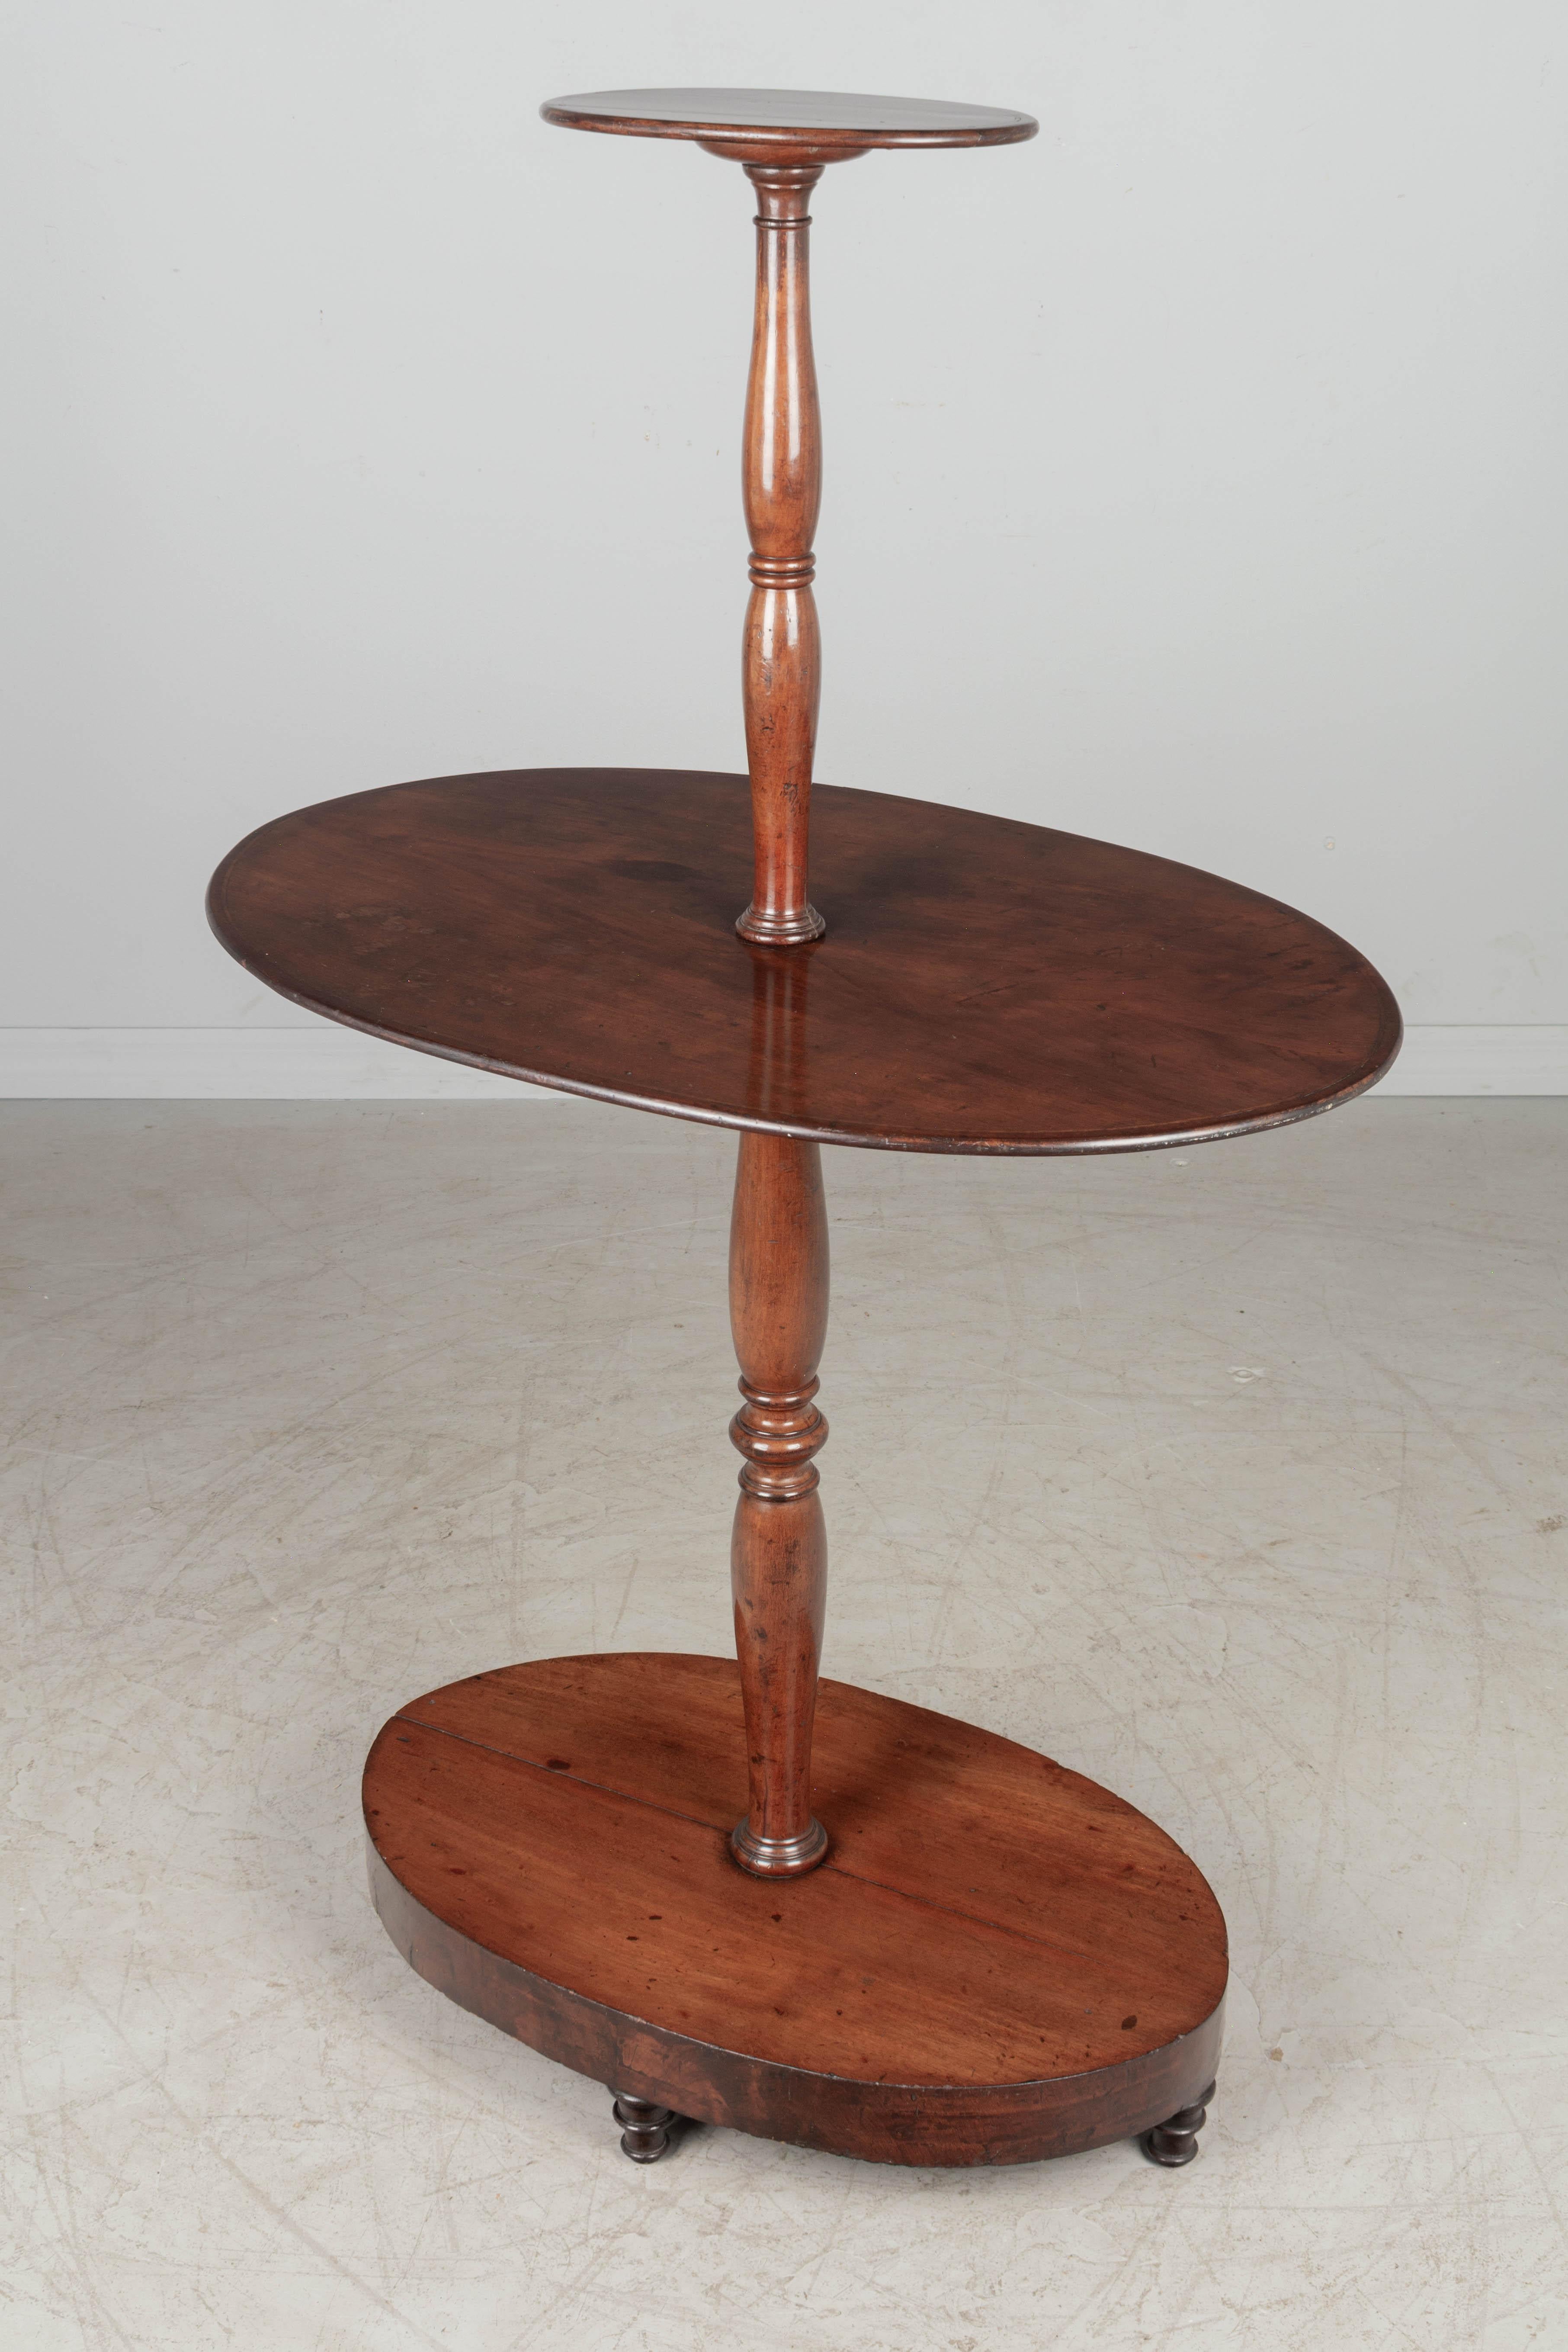 19th Century English Mahogany Tiered Table or Stand In Good Condition For Sale In Winter Park, FL